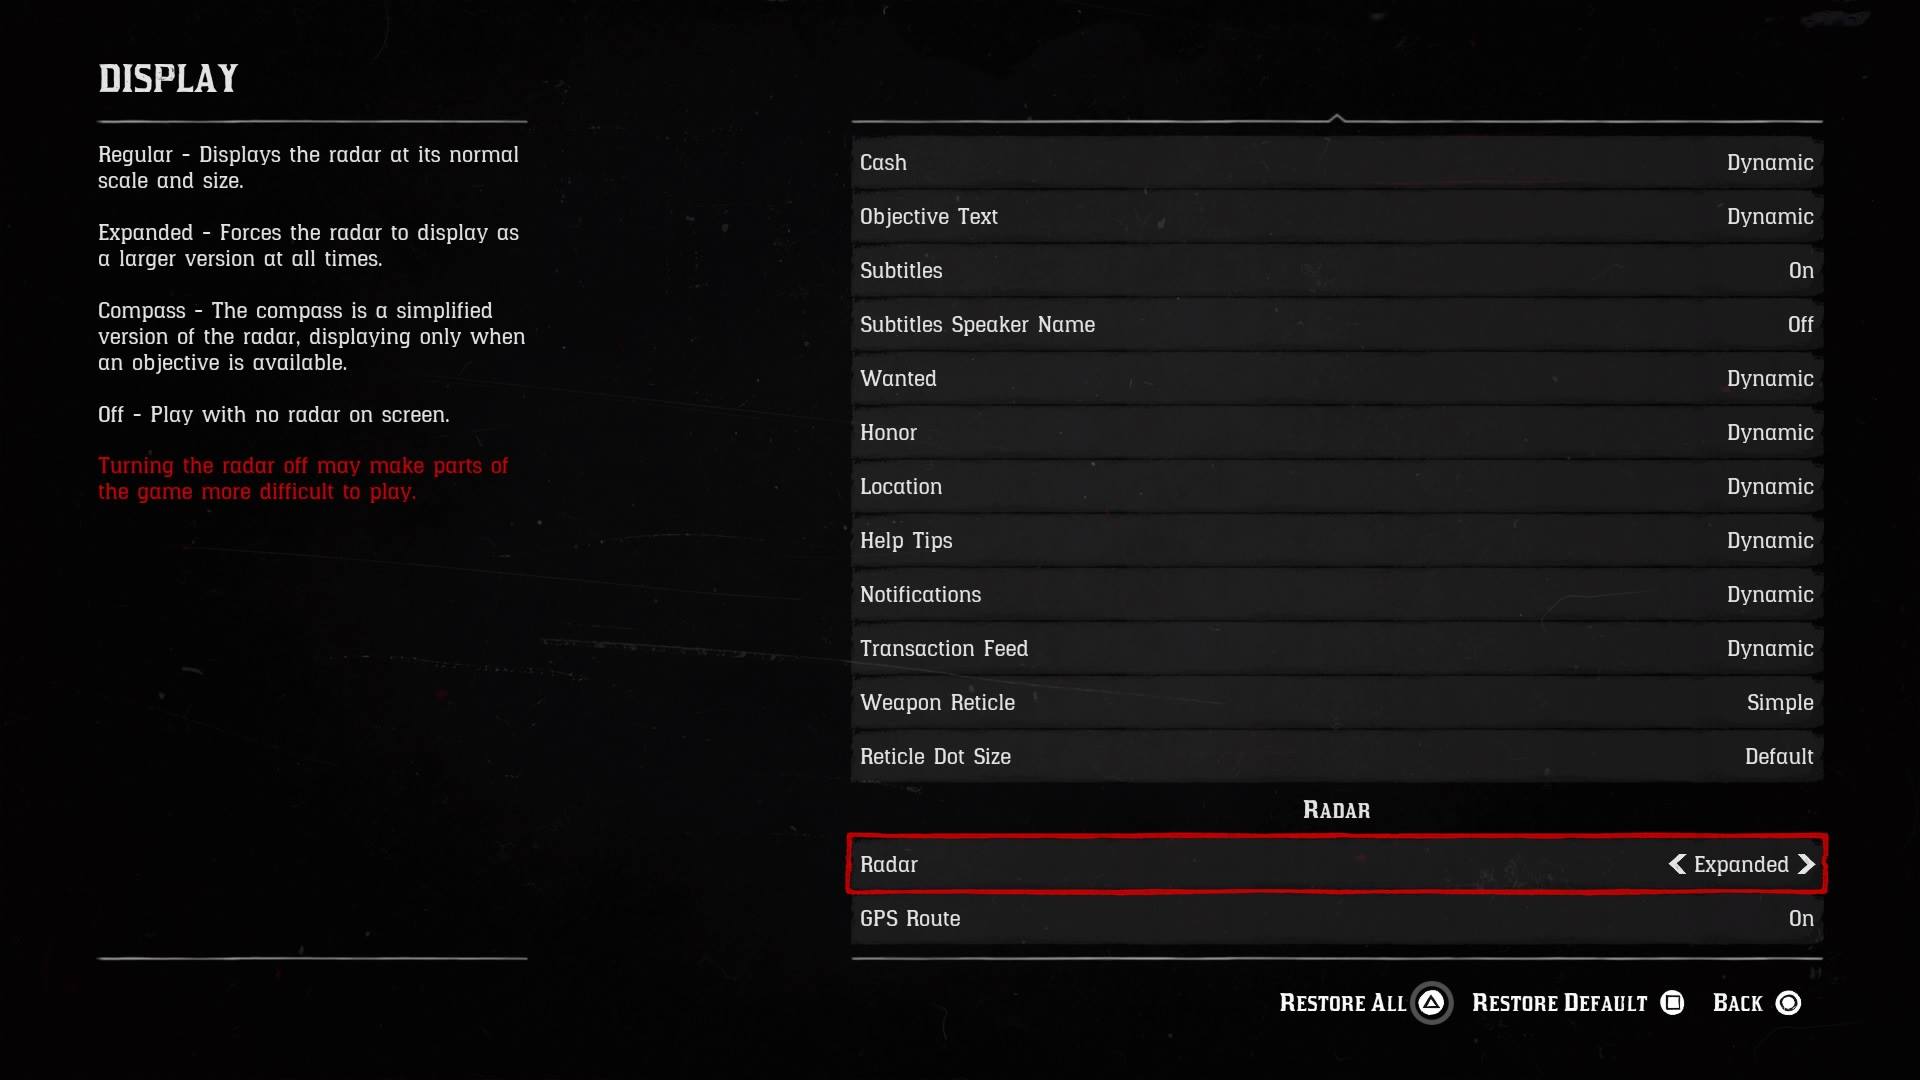 Red Dead Redemption 2: Head to the Radar subsection to tweak the mini-map.